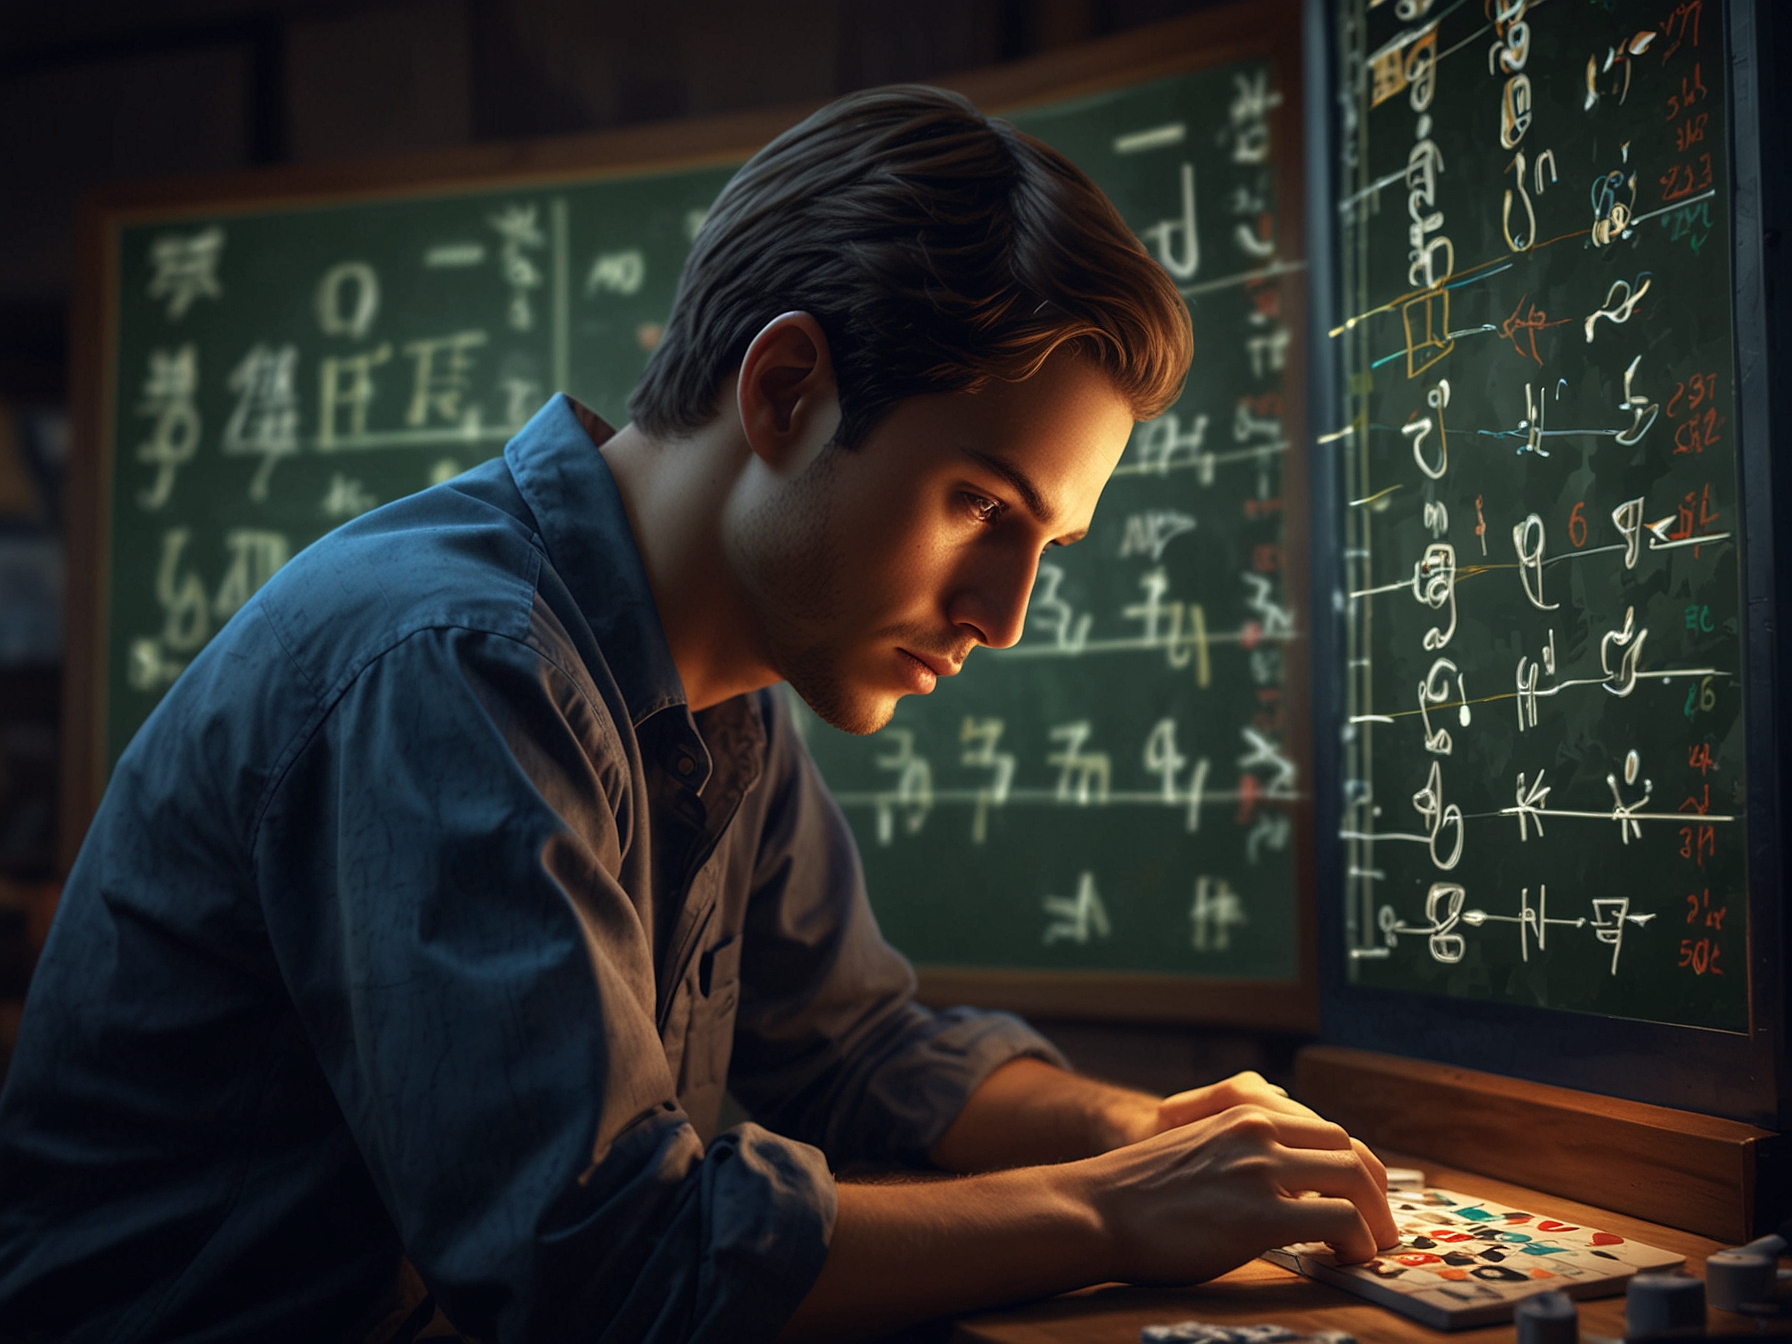 A player deeply focused on a digital screen with hints like common prefixes and vowel placements highlighted, showcasing the strategic thinking involved in successfully solving Quordle puzzles.